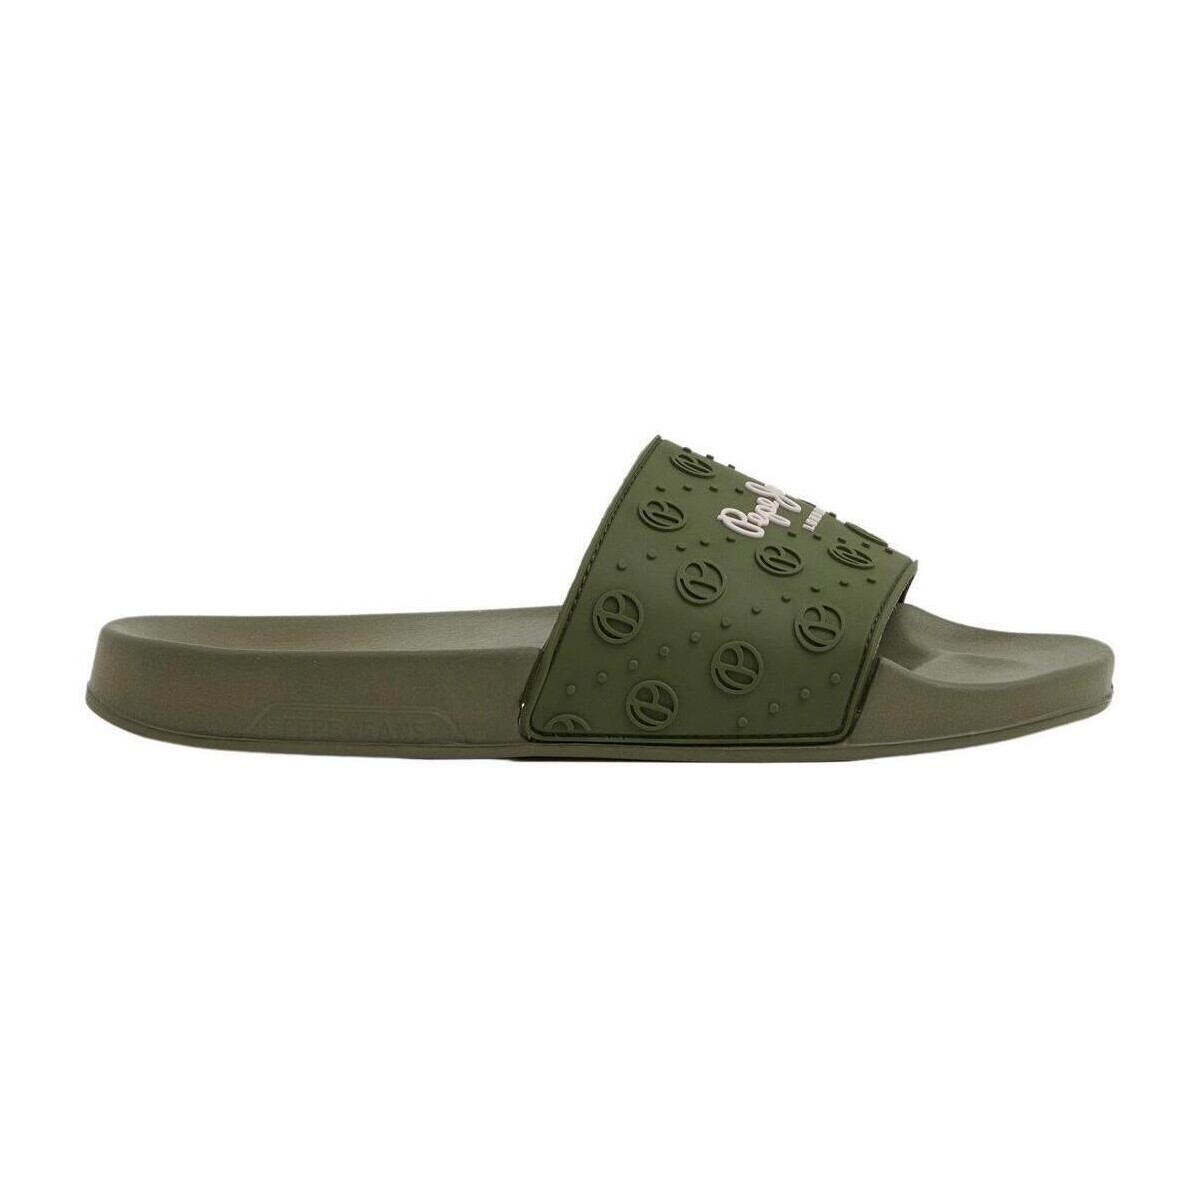 Zapatos Mujer Chanclas Pepe jeans SLIDER PLAIN Verde